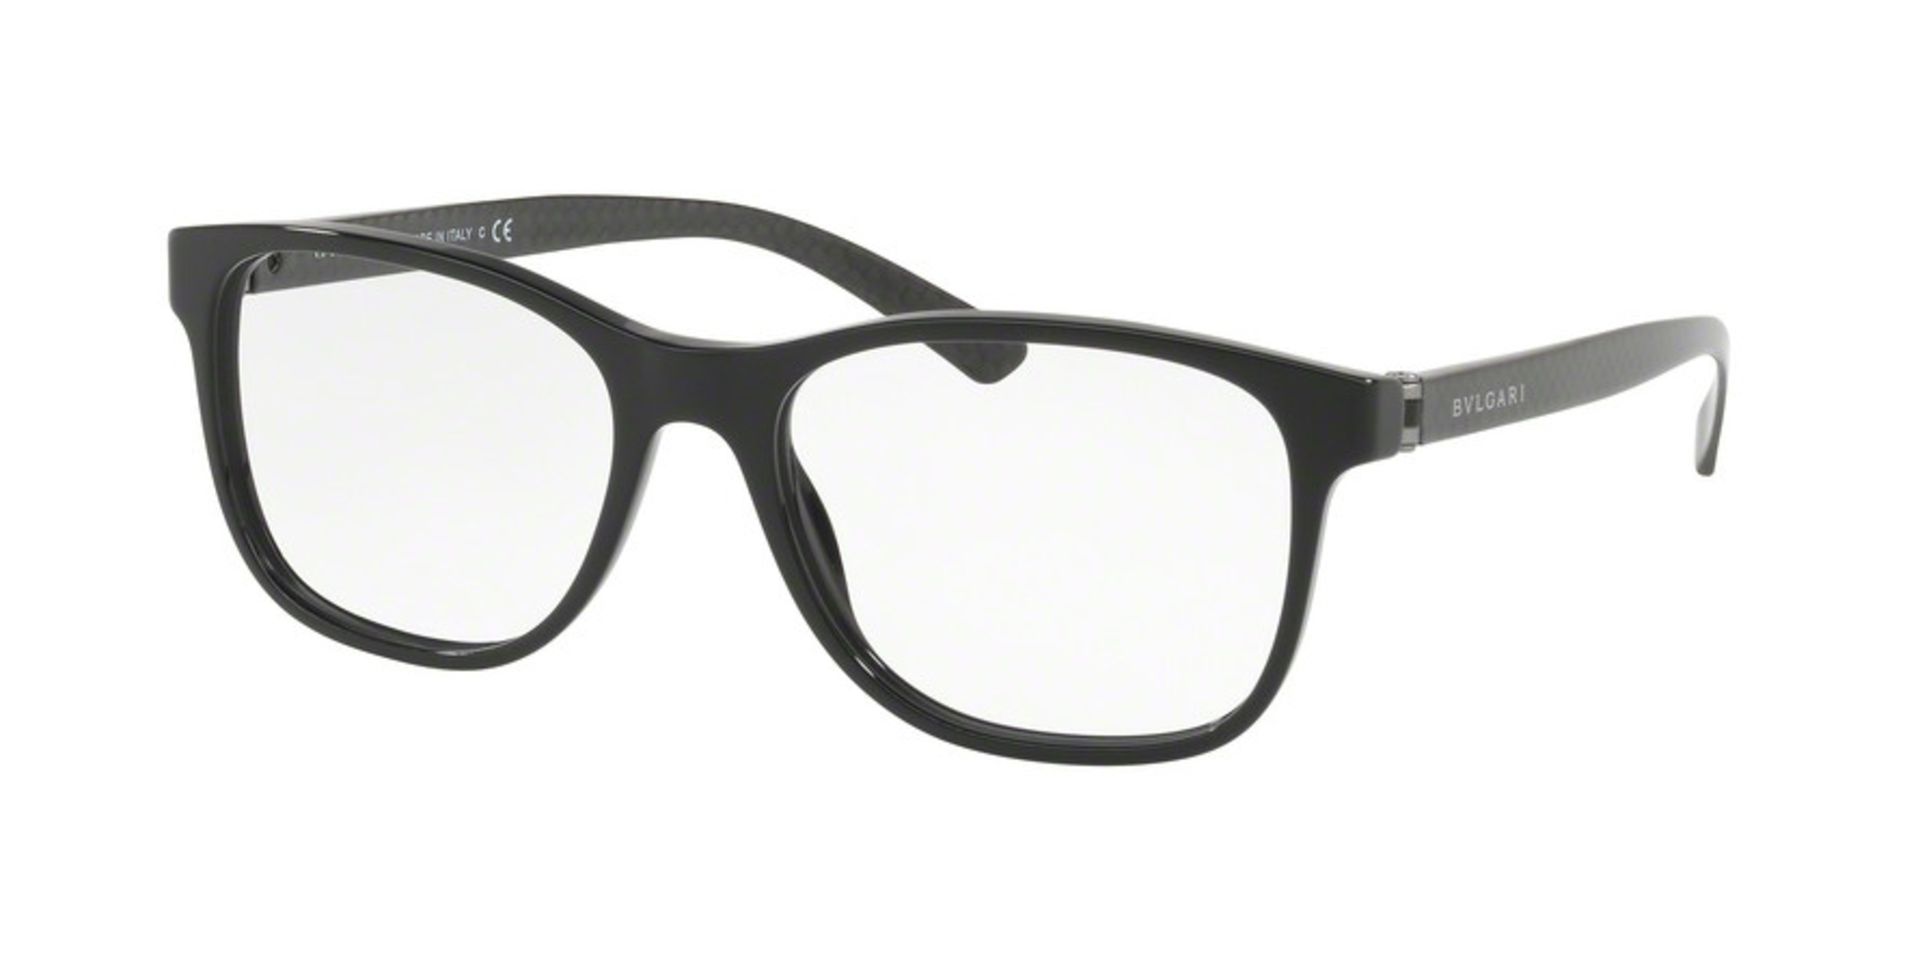 Bvlgari Gents Spectacle Frames with Original Case - Ex Demo or Return Stock from Private Jet Char... - Image 2 of 7